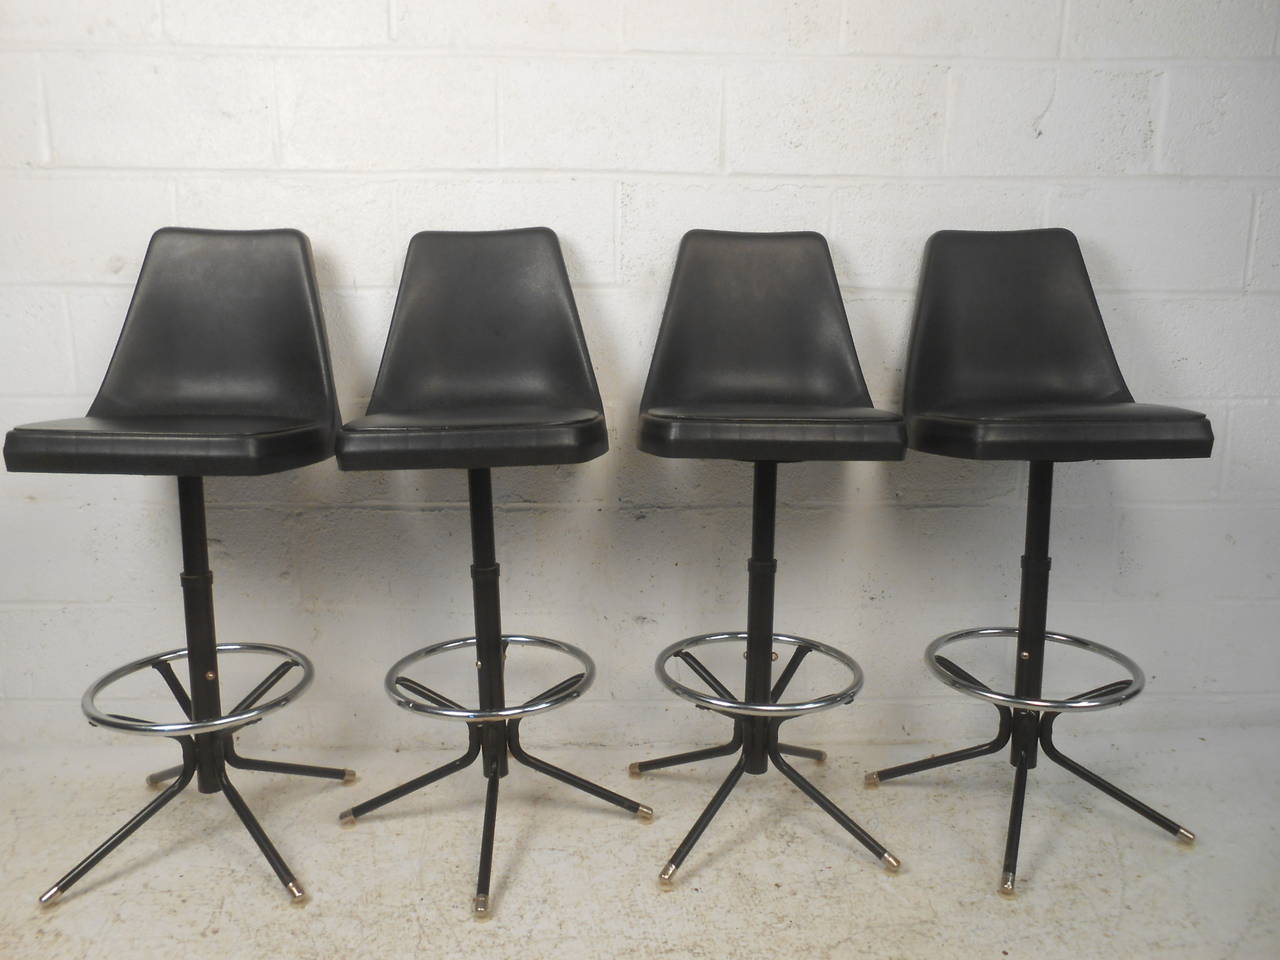 Vintage modern stools with plastic backs and vinyl seats. Chrome foot rests, swivel seats, attractive curved back.

(Please confirm item location - NY or NJ - with dealer)